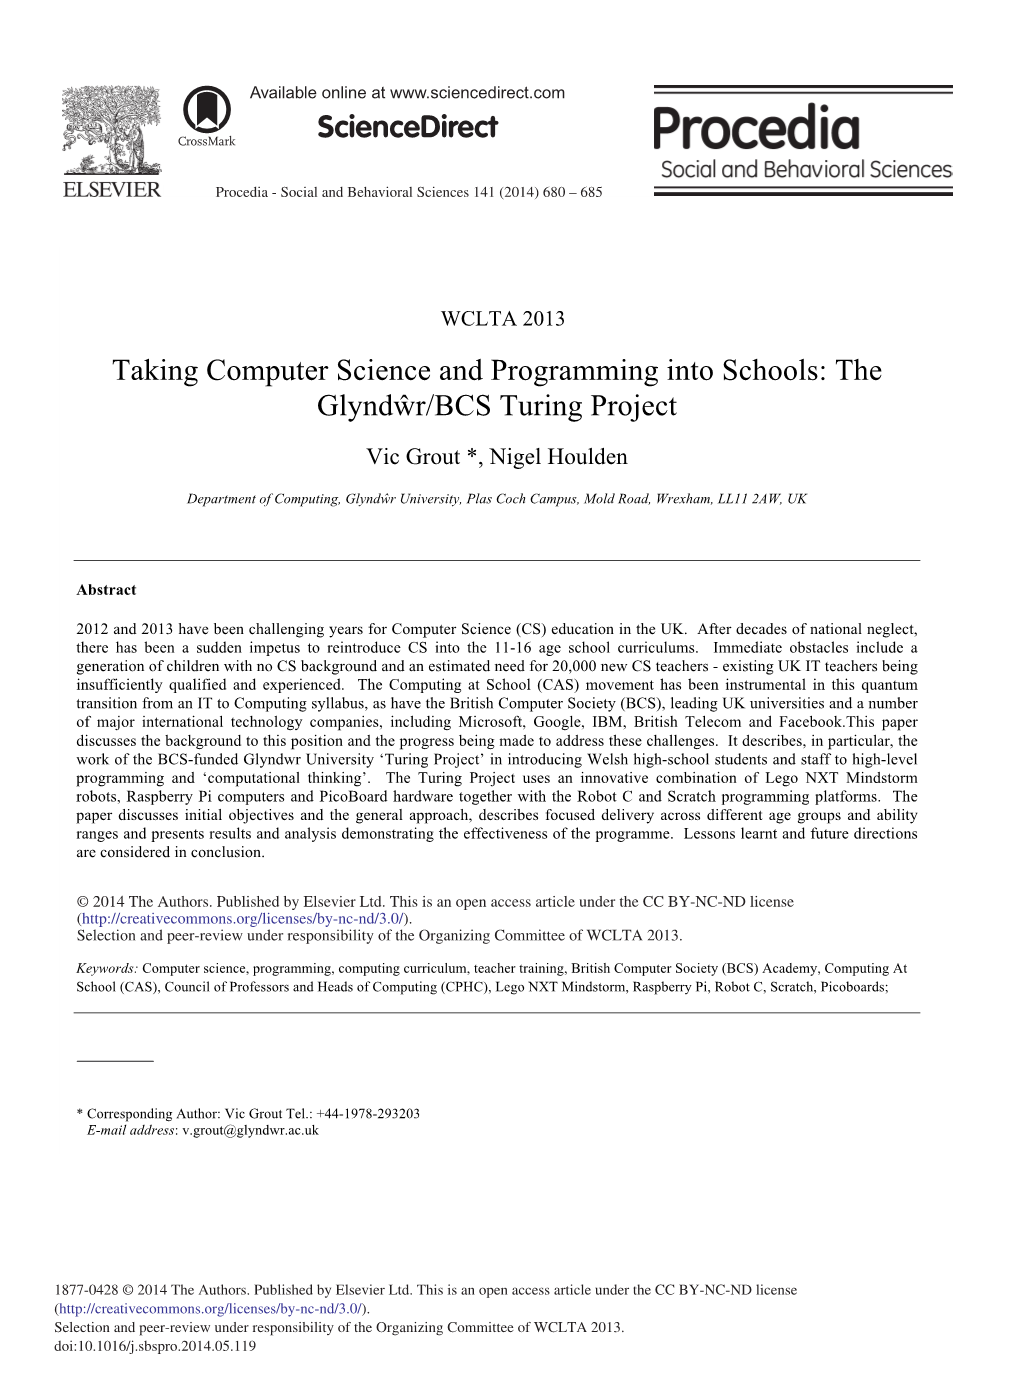 Taking Computer Science and Programming Into Schools: the Glyndŵr/BCS Turing Project